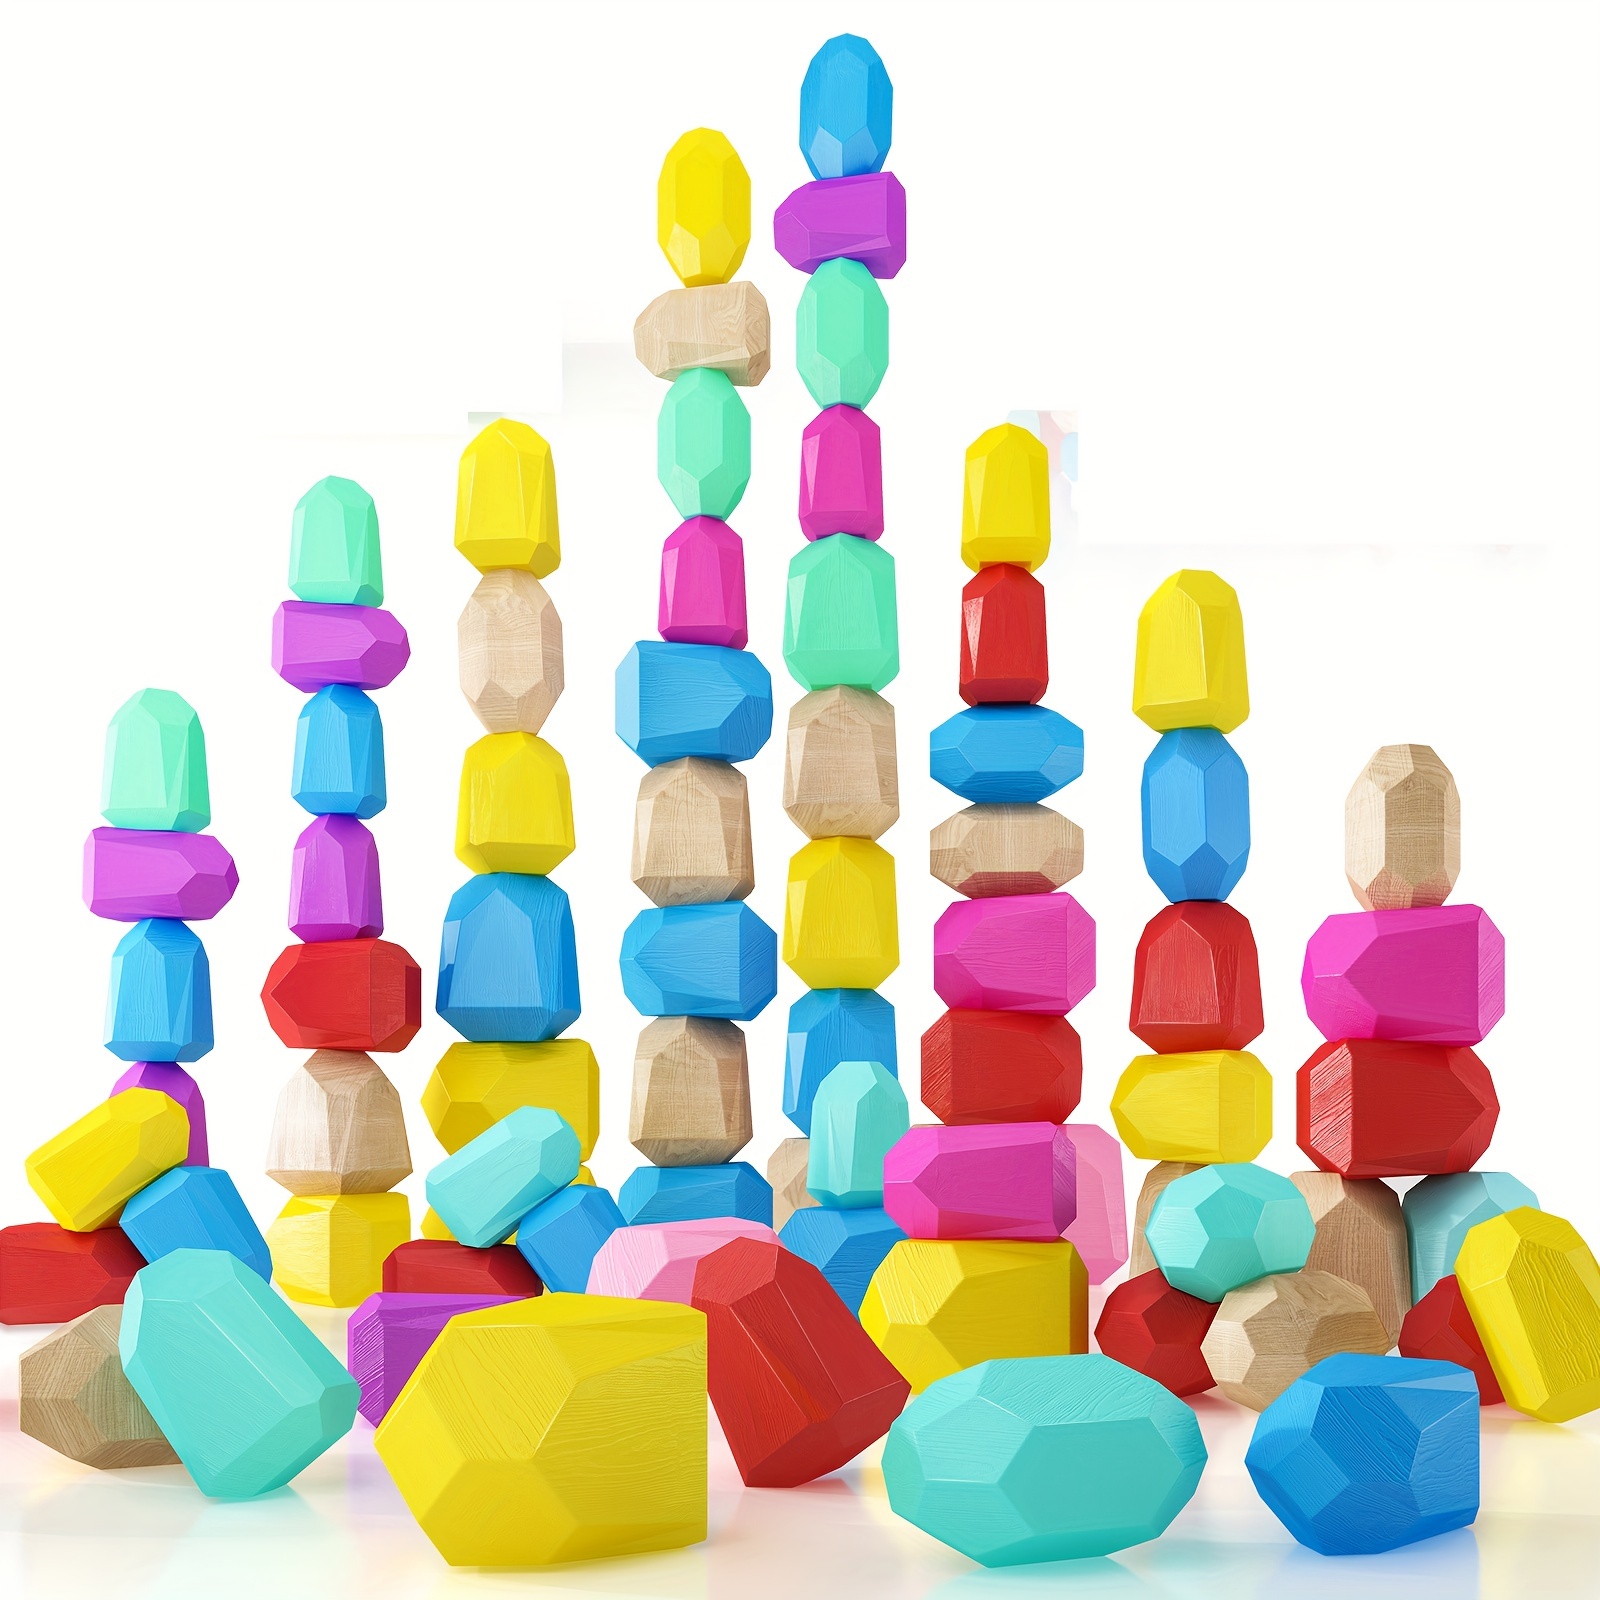 

42pcs Wooden Stacking Rocks Toys, Montessori Colorful Sorting Stacking Rocks Toys For Toddlers, Preschool Learning Building Blocks Stones For Kids, Birthday Christmas Gifts For Girls Boys